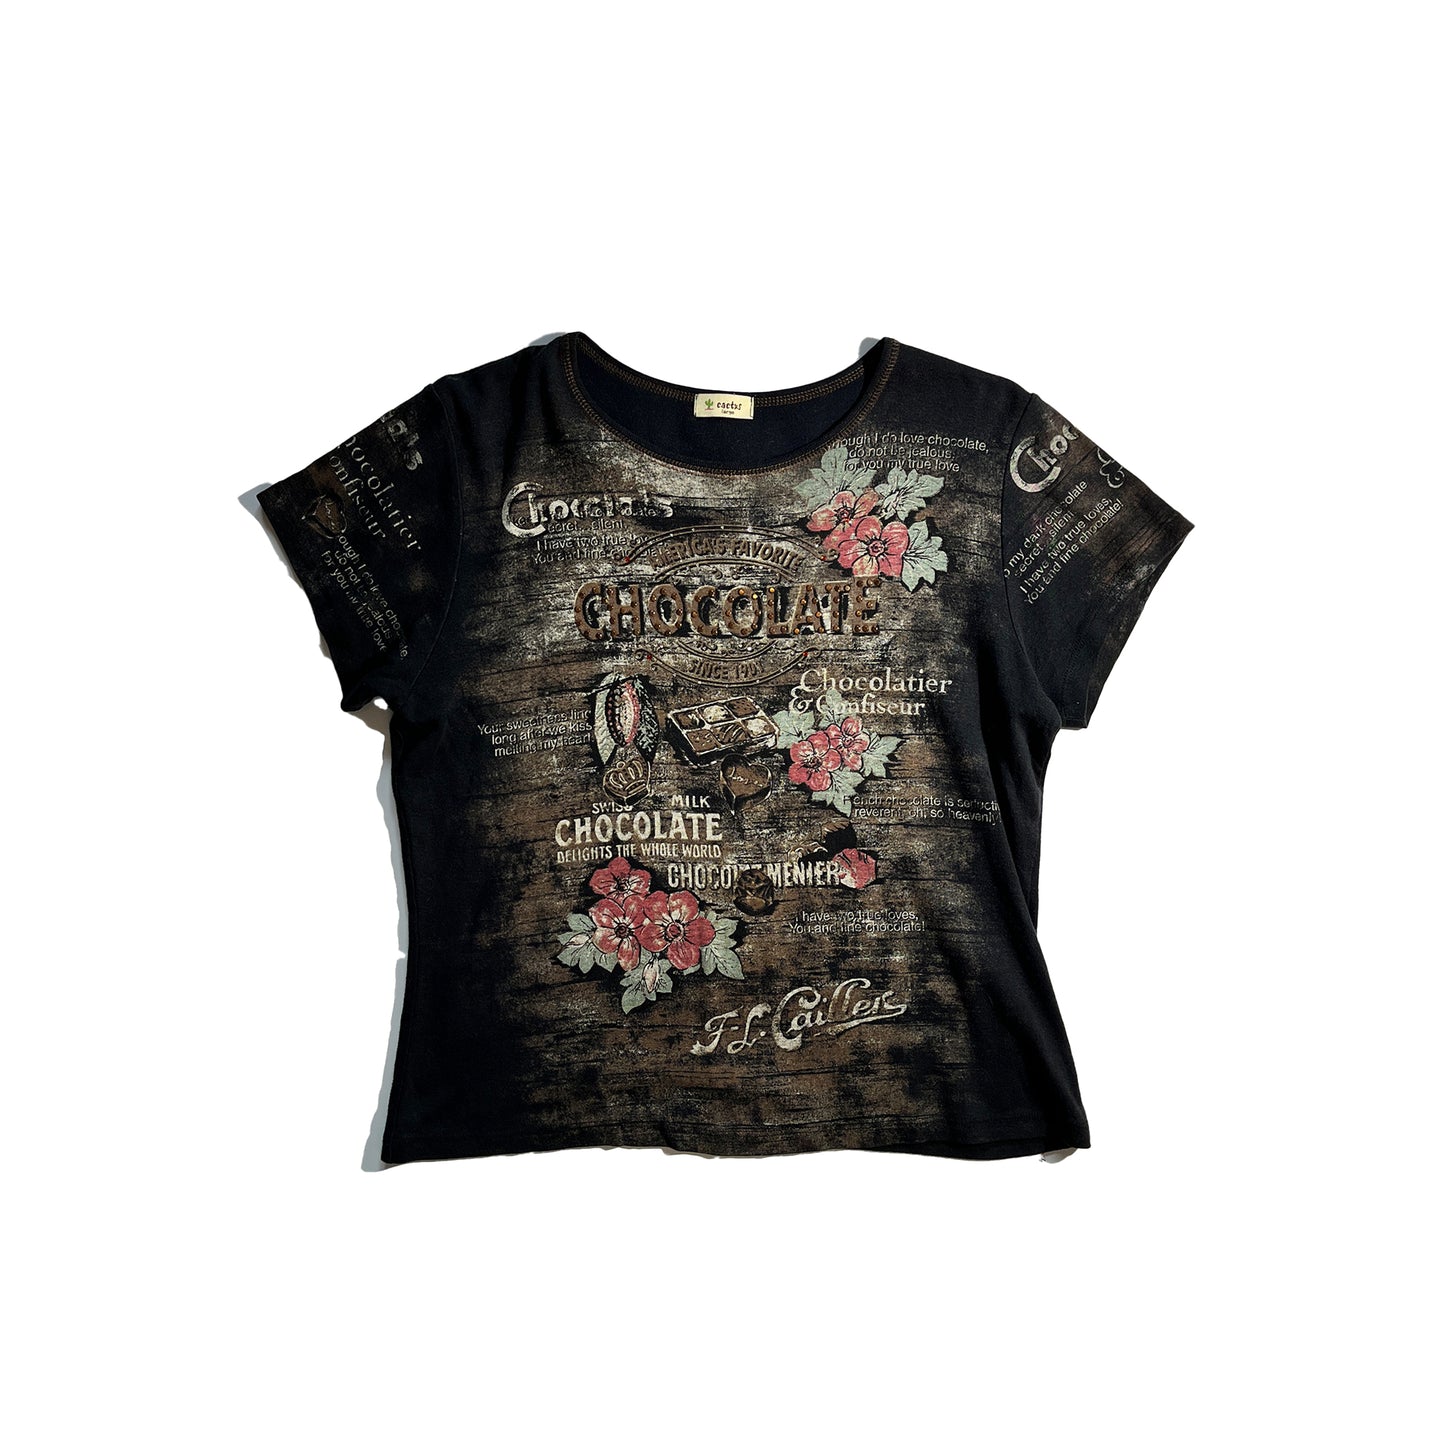 Vintage Chocolate T-Shirt Top Sequence